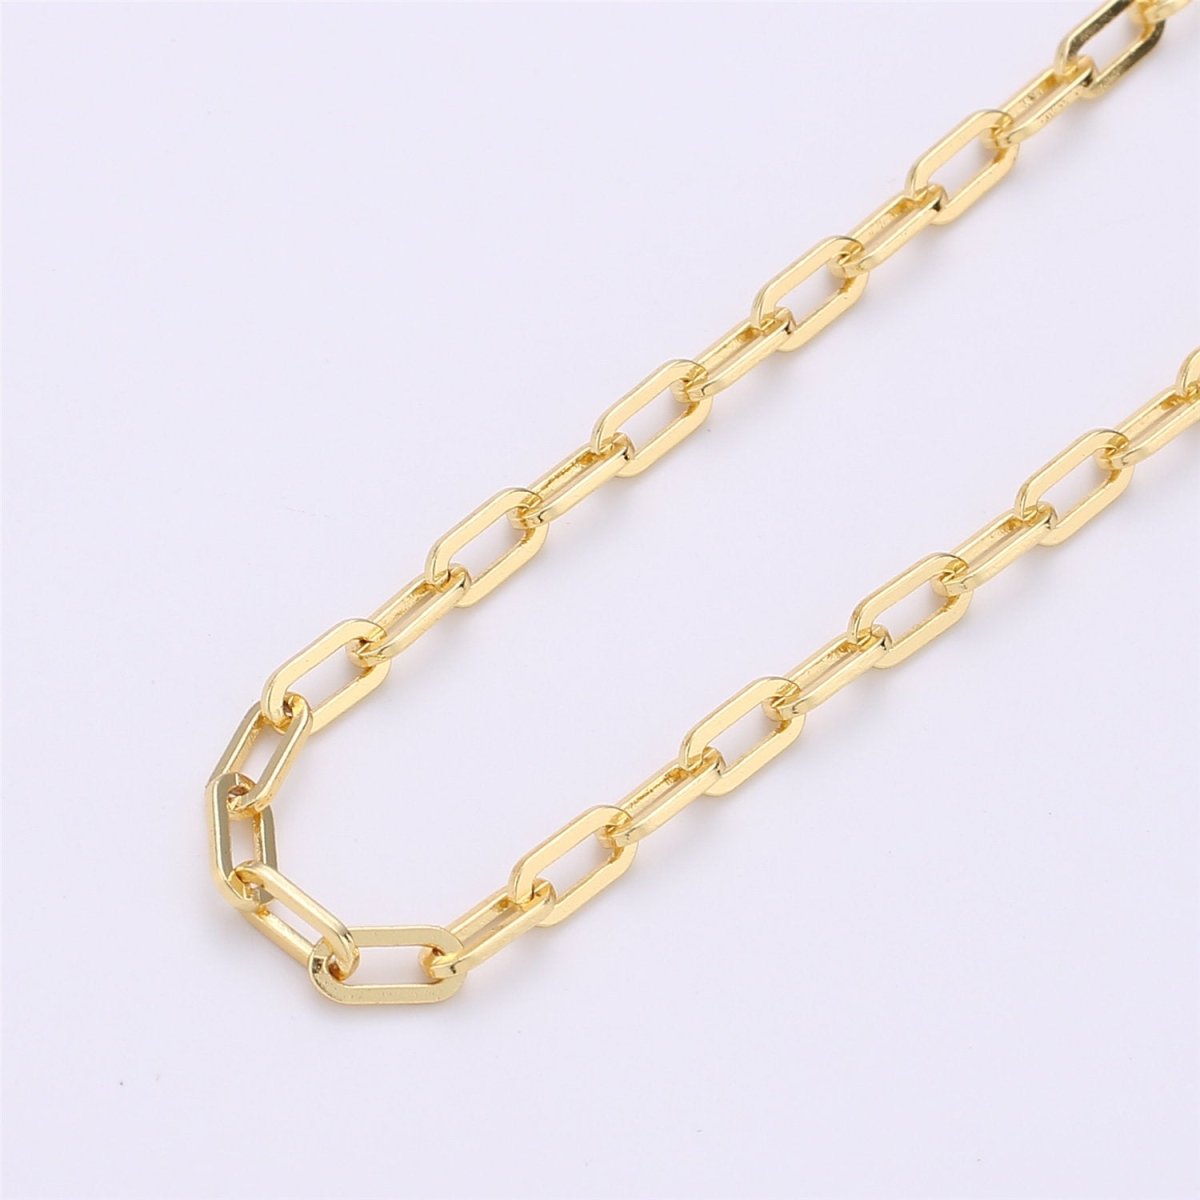 24K Gold Filled PAPER CLIP Chain, Elongated Rectangle Oval Chain, 3mm x 7mm Chain by Yard, Unfinished Chain for DIY Jewelry Supply | ROLL-121, ROLL-122, ROLL-123, ROLL-124 Clearance Pricing - DLUXCA